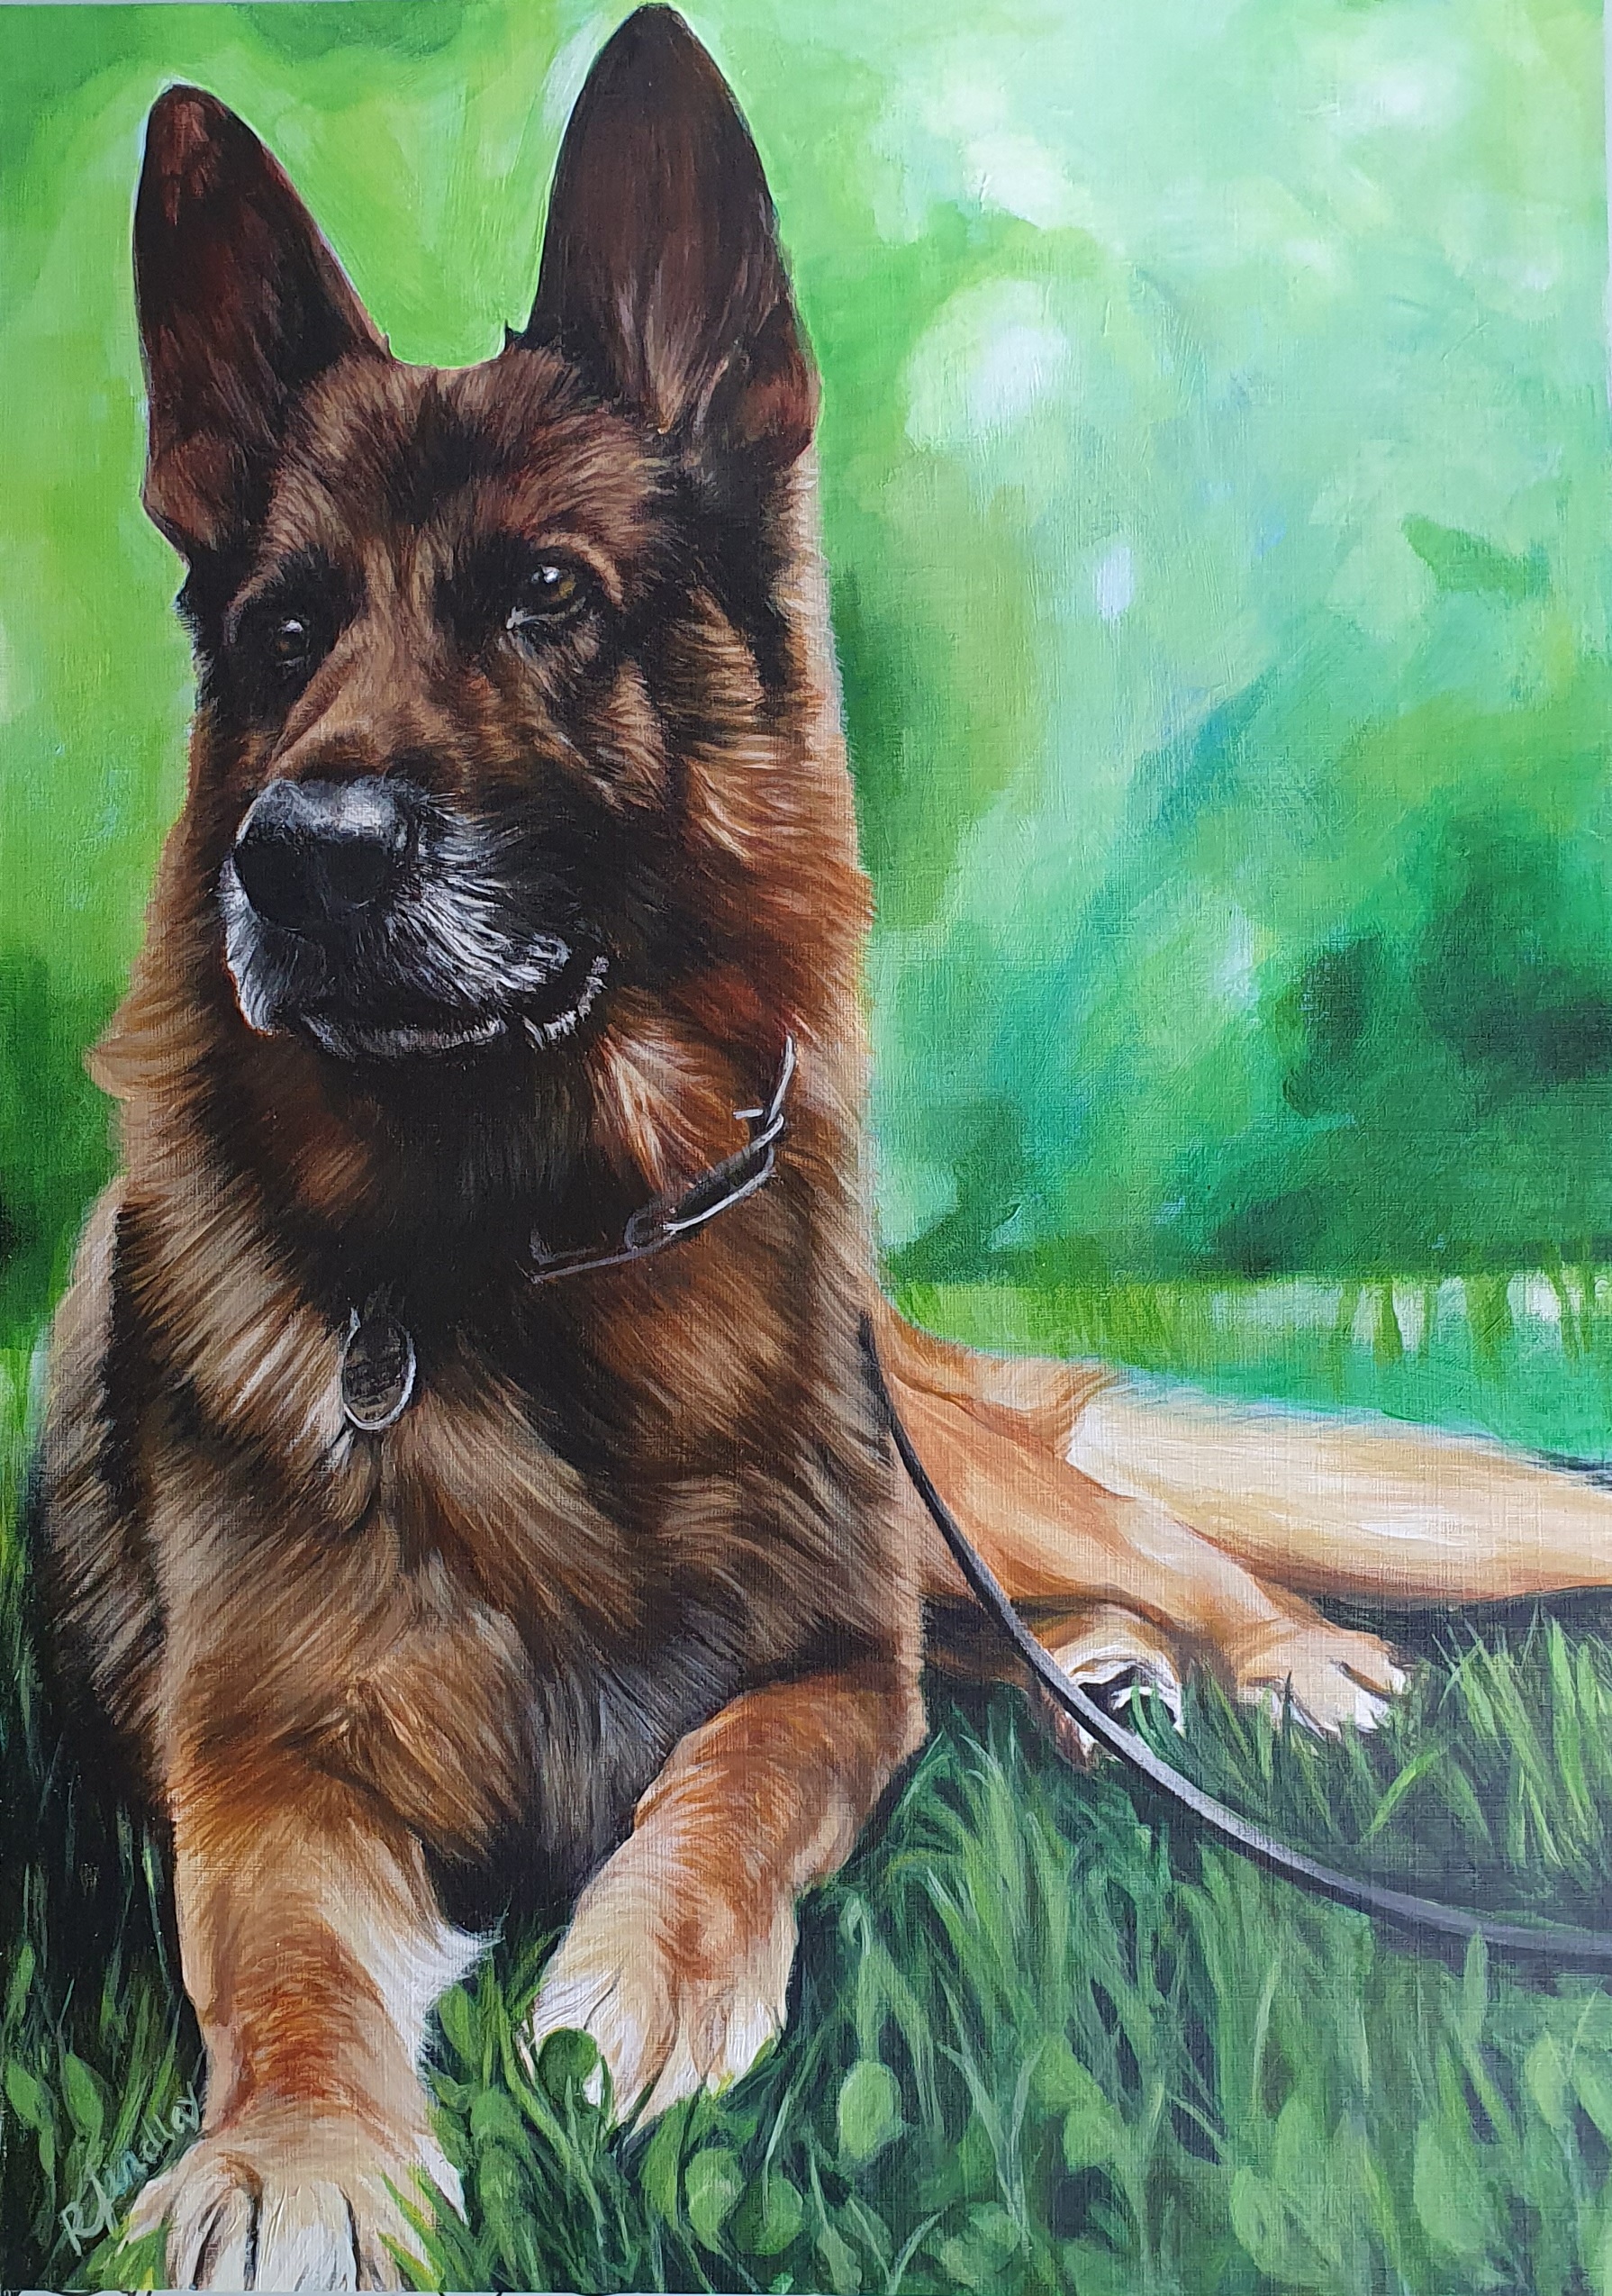 This is a pet portrait commission. It shows a german shepherd dog sat on the grass.